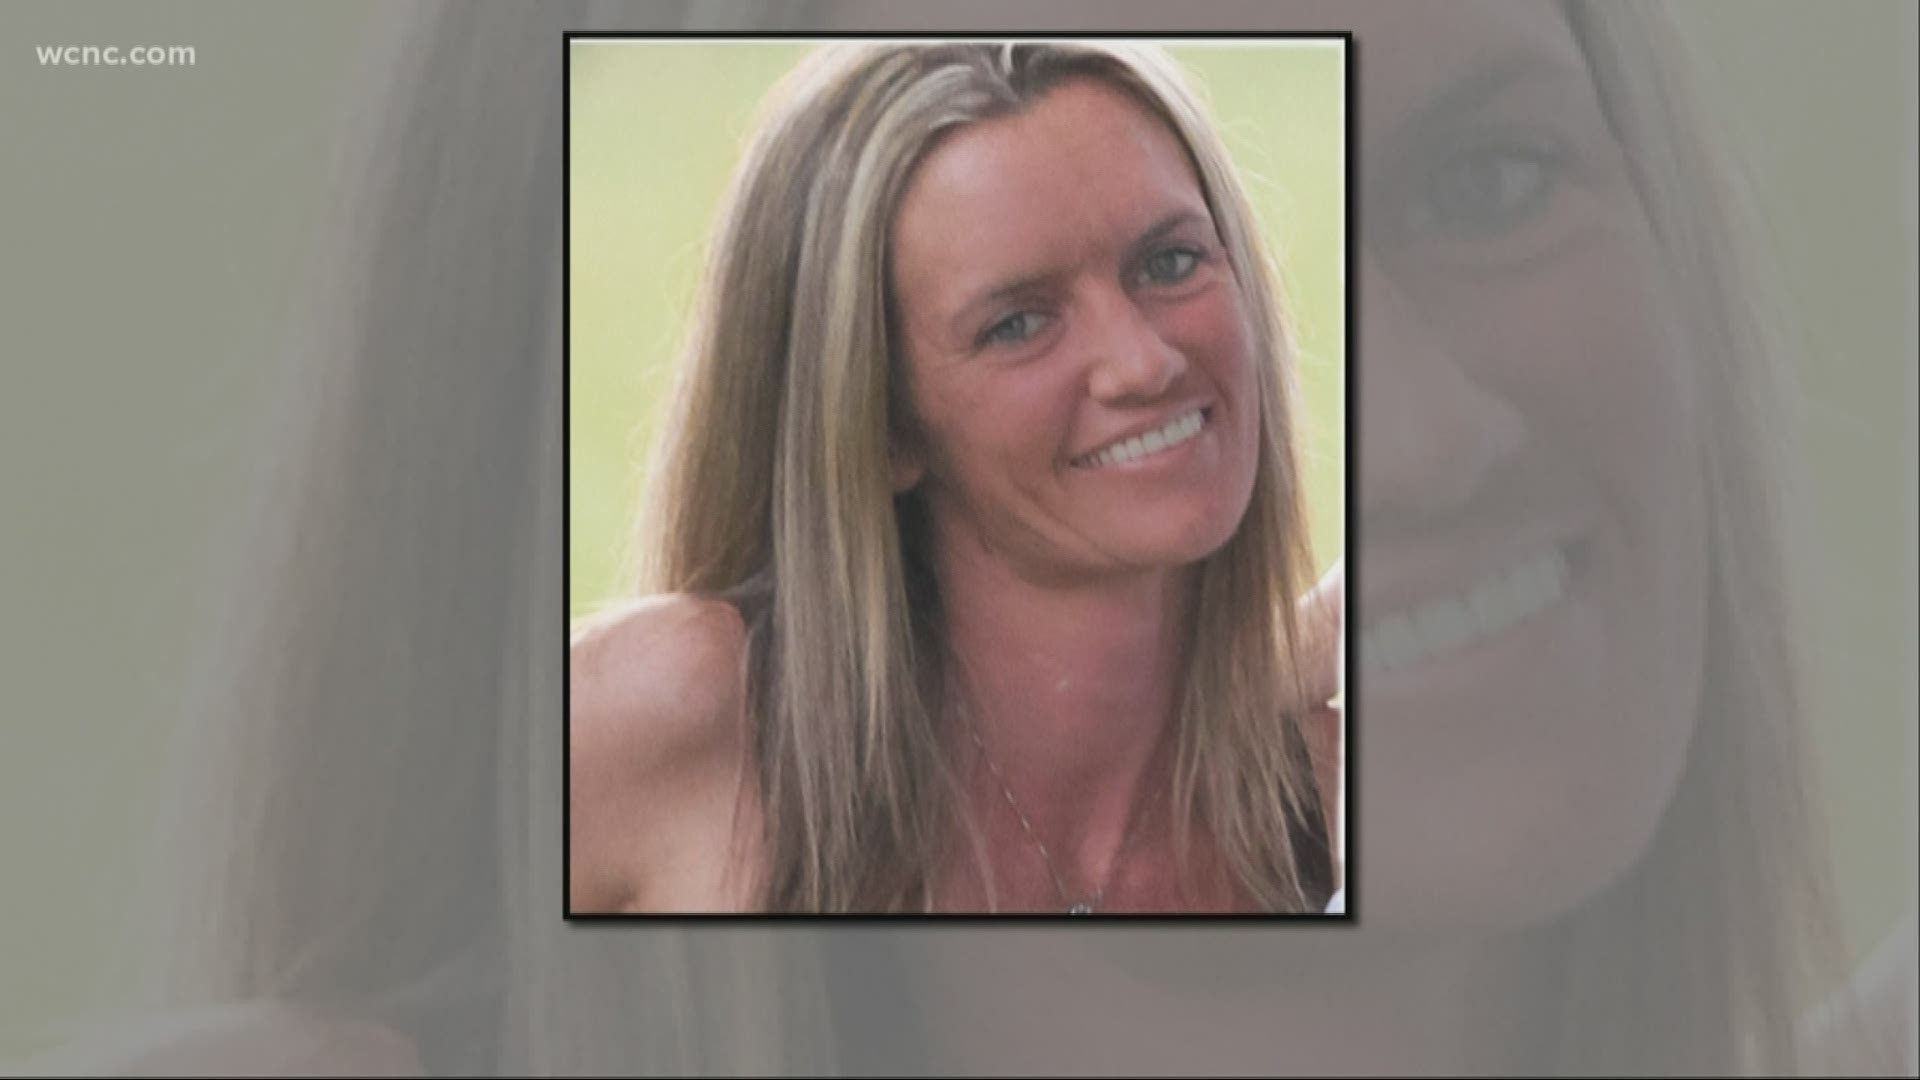 Police in Concord believe they've found the remains of Crystal Dawn Morrison, who went missing in August 2012 along Davidson Highway.